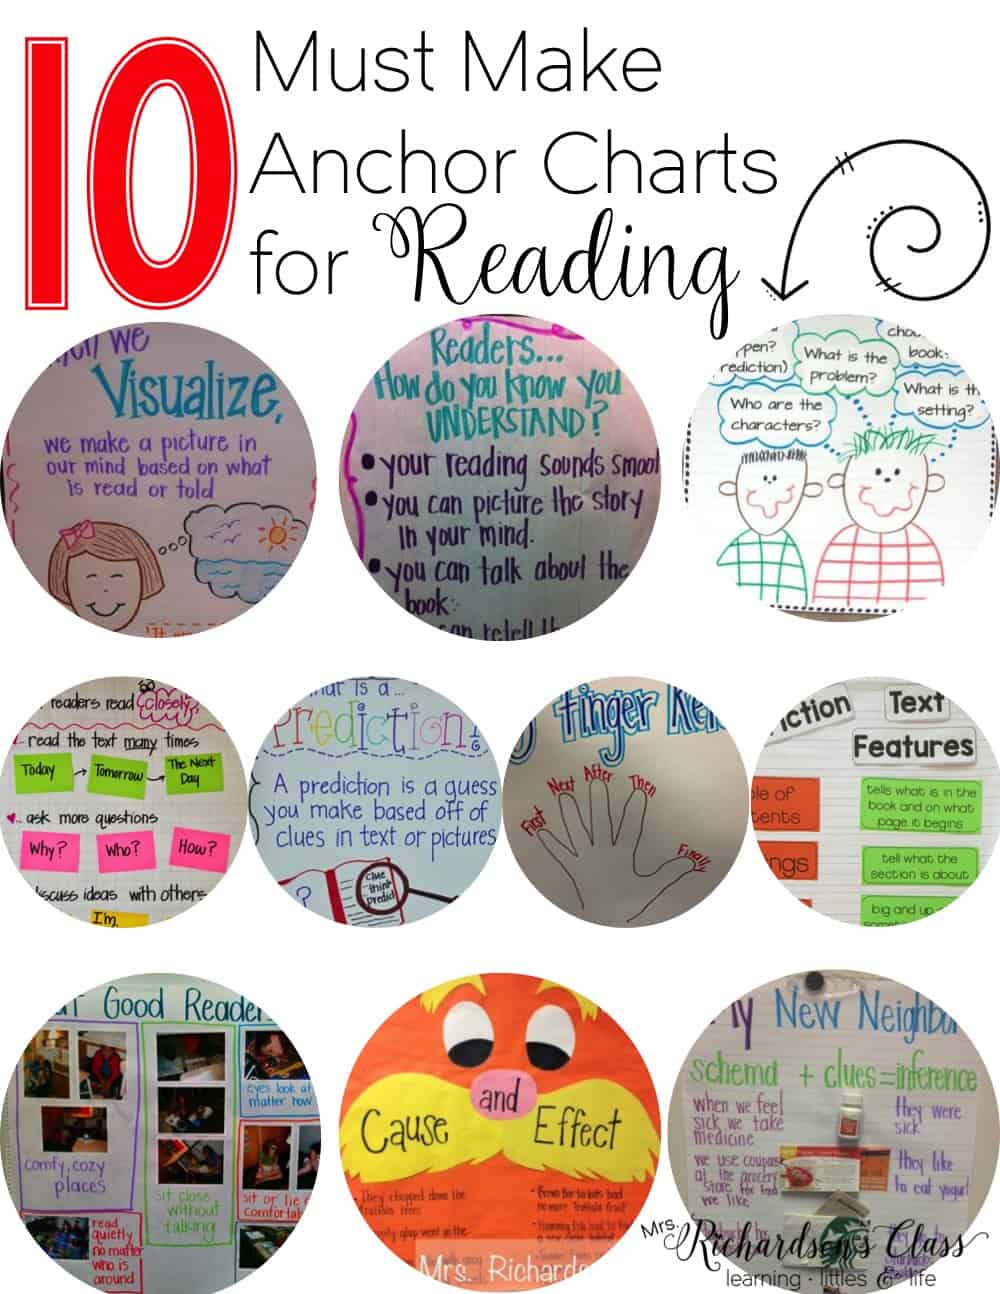 Anchor Chart Intervention! Secrets to Making Effective AND Well-Designed  Anchor Charts - Minds in Bloom